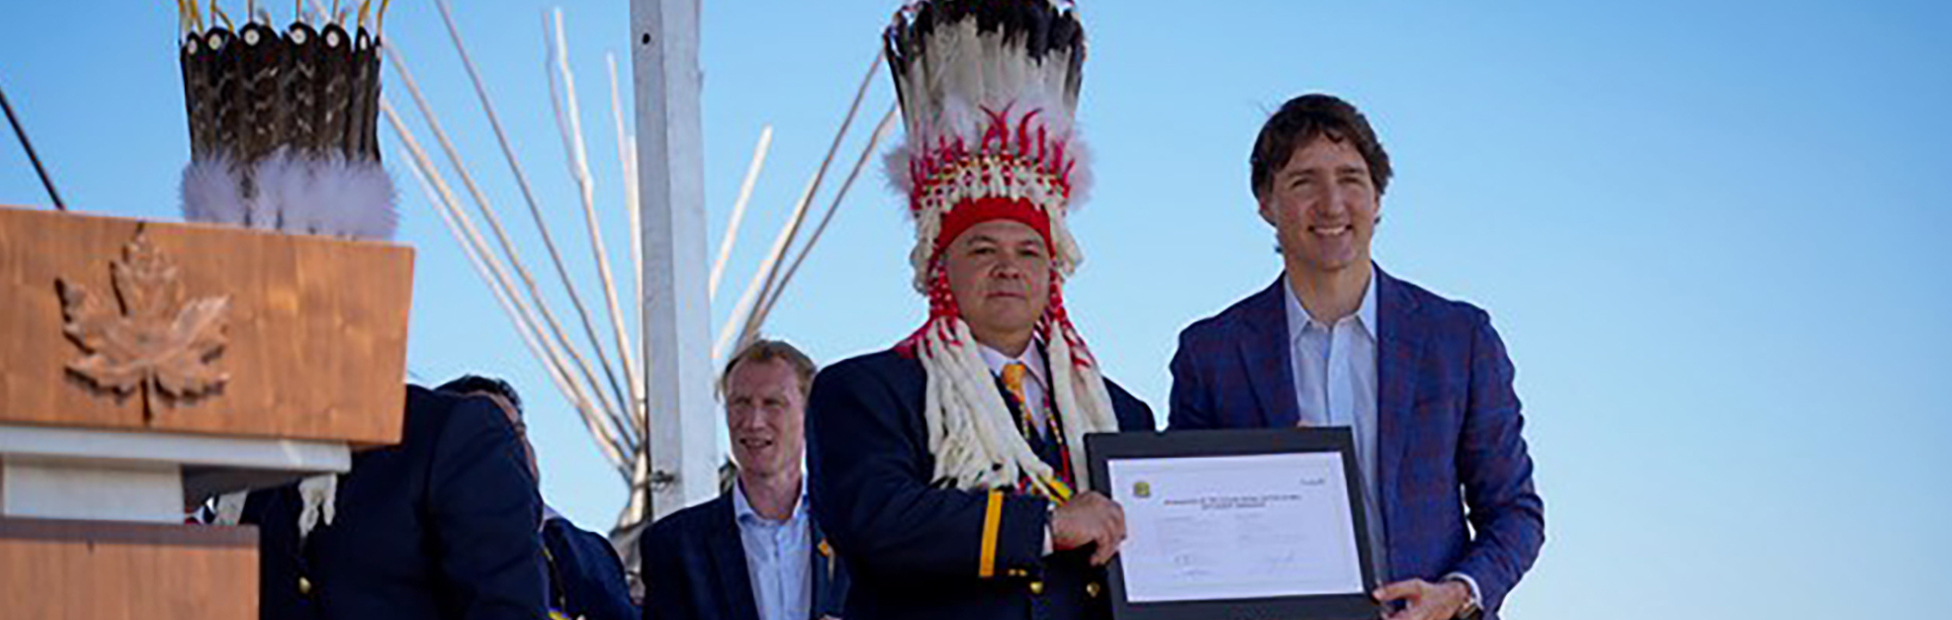 Siksika's Settlement signed by Chief Ouray Crowfoot and Justin Trudeau